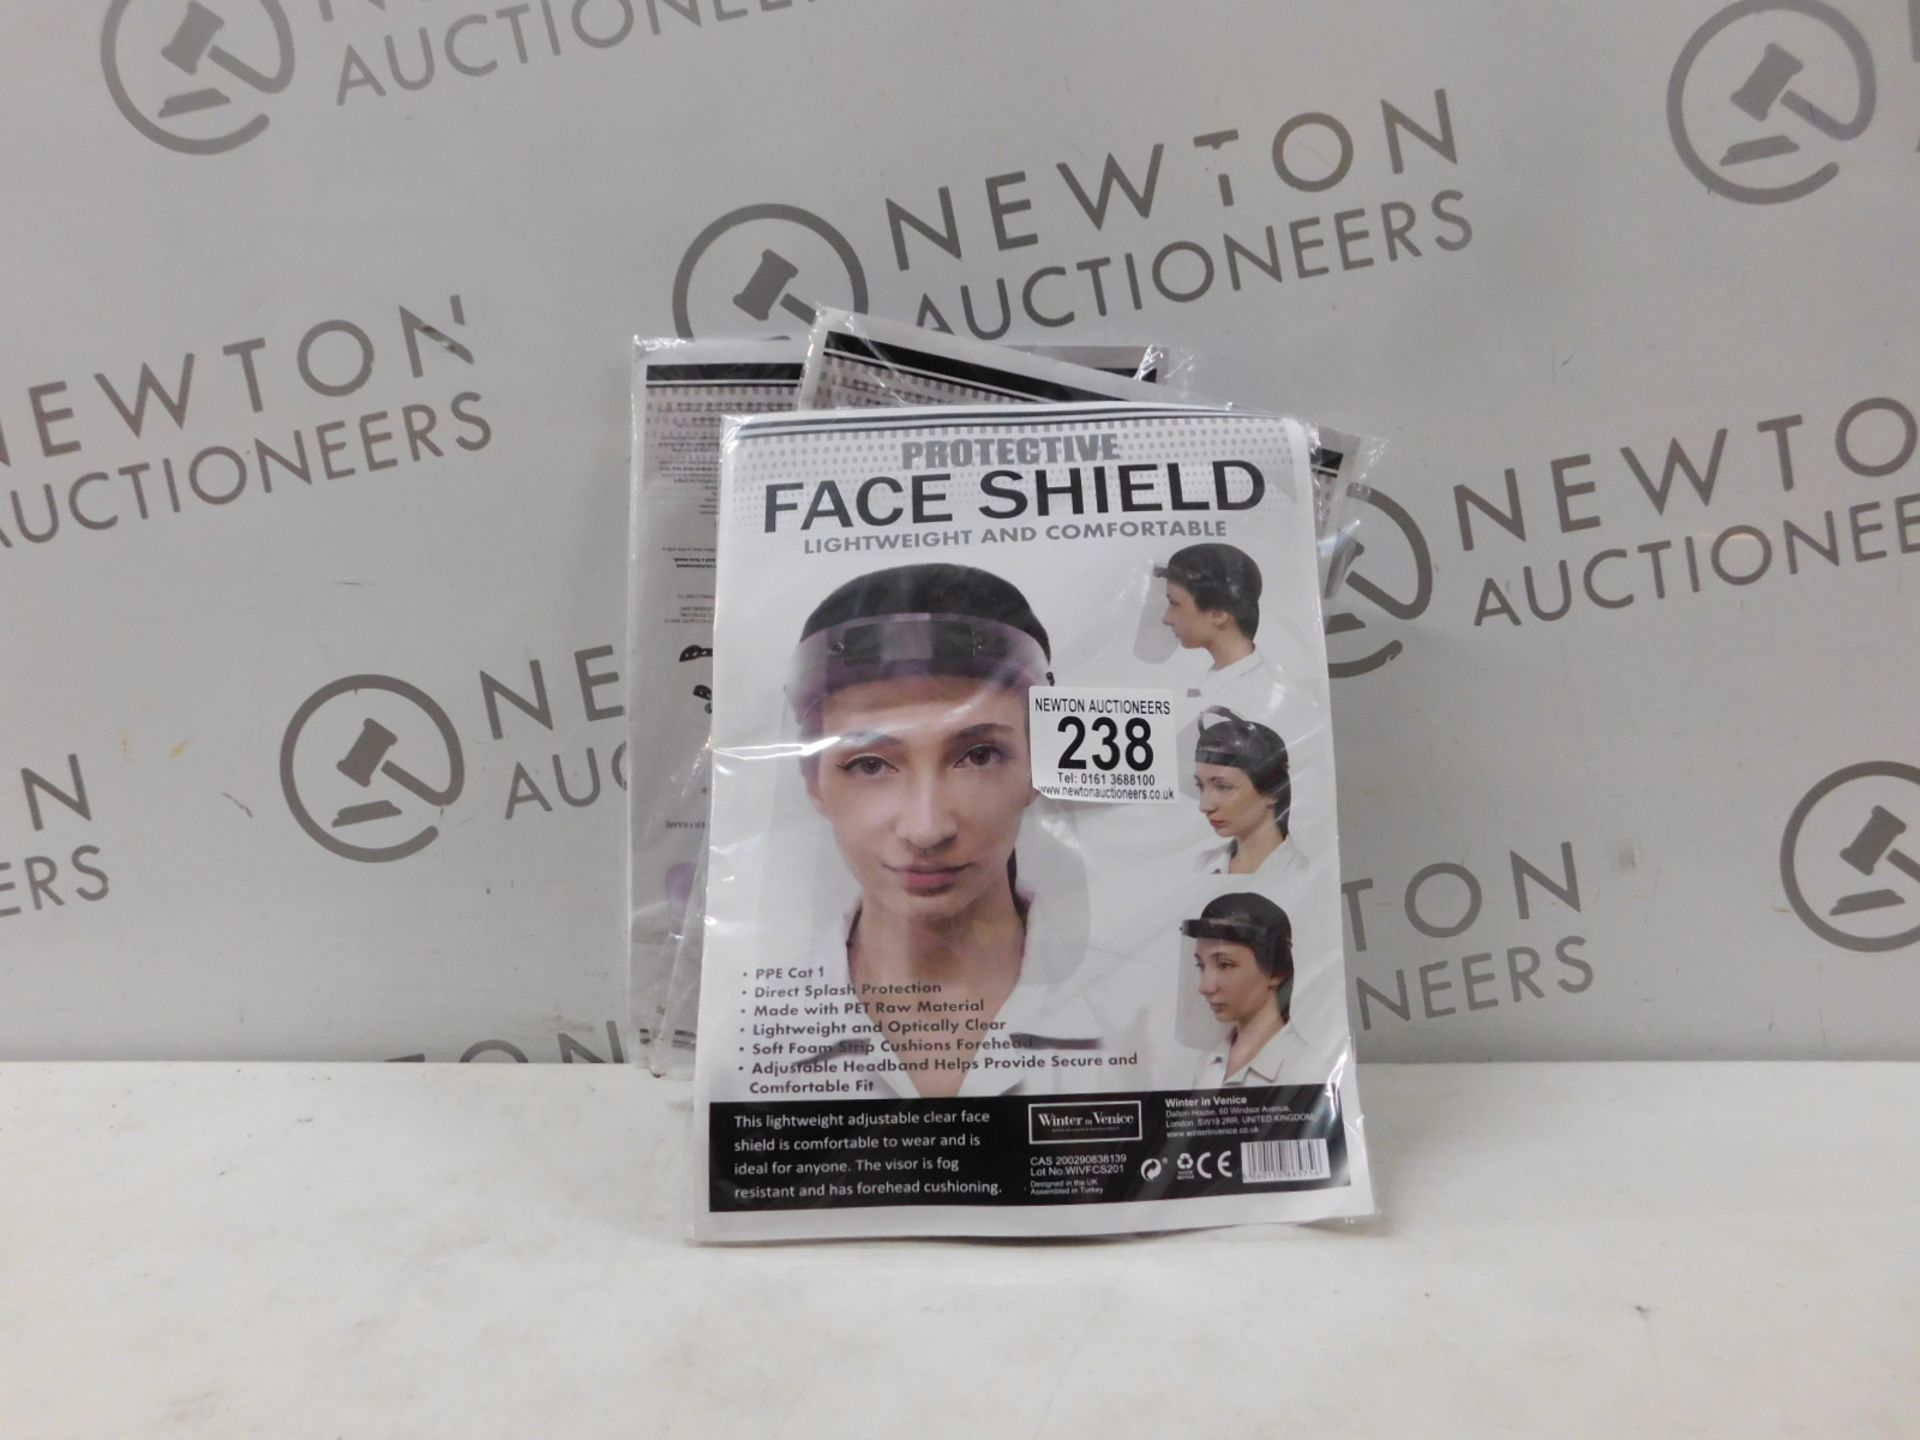 3 BRAND NEW PACKS OF PROTECTIVE FACE SHIELDS RRP Â£9.99